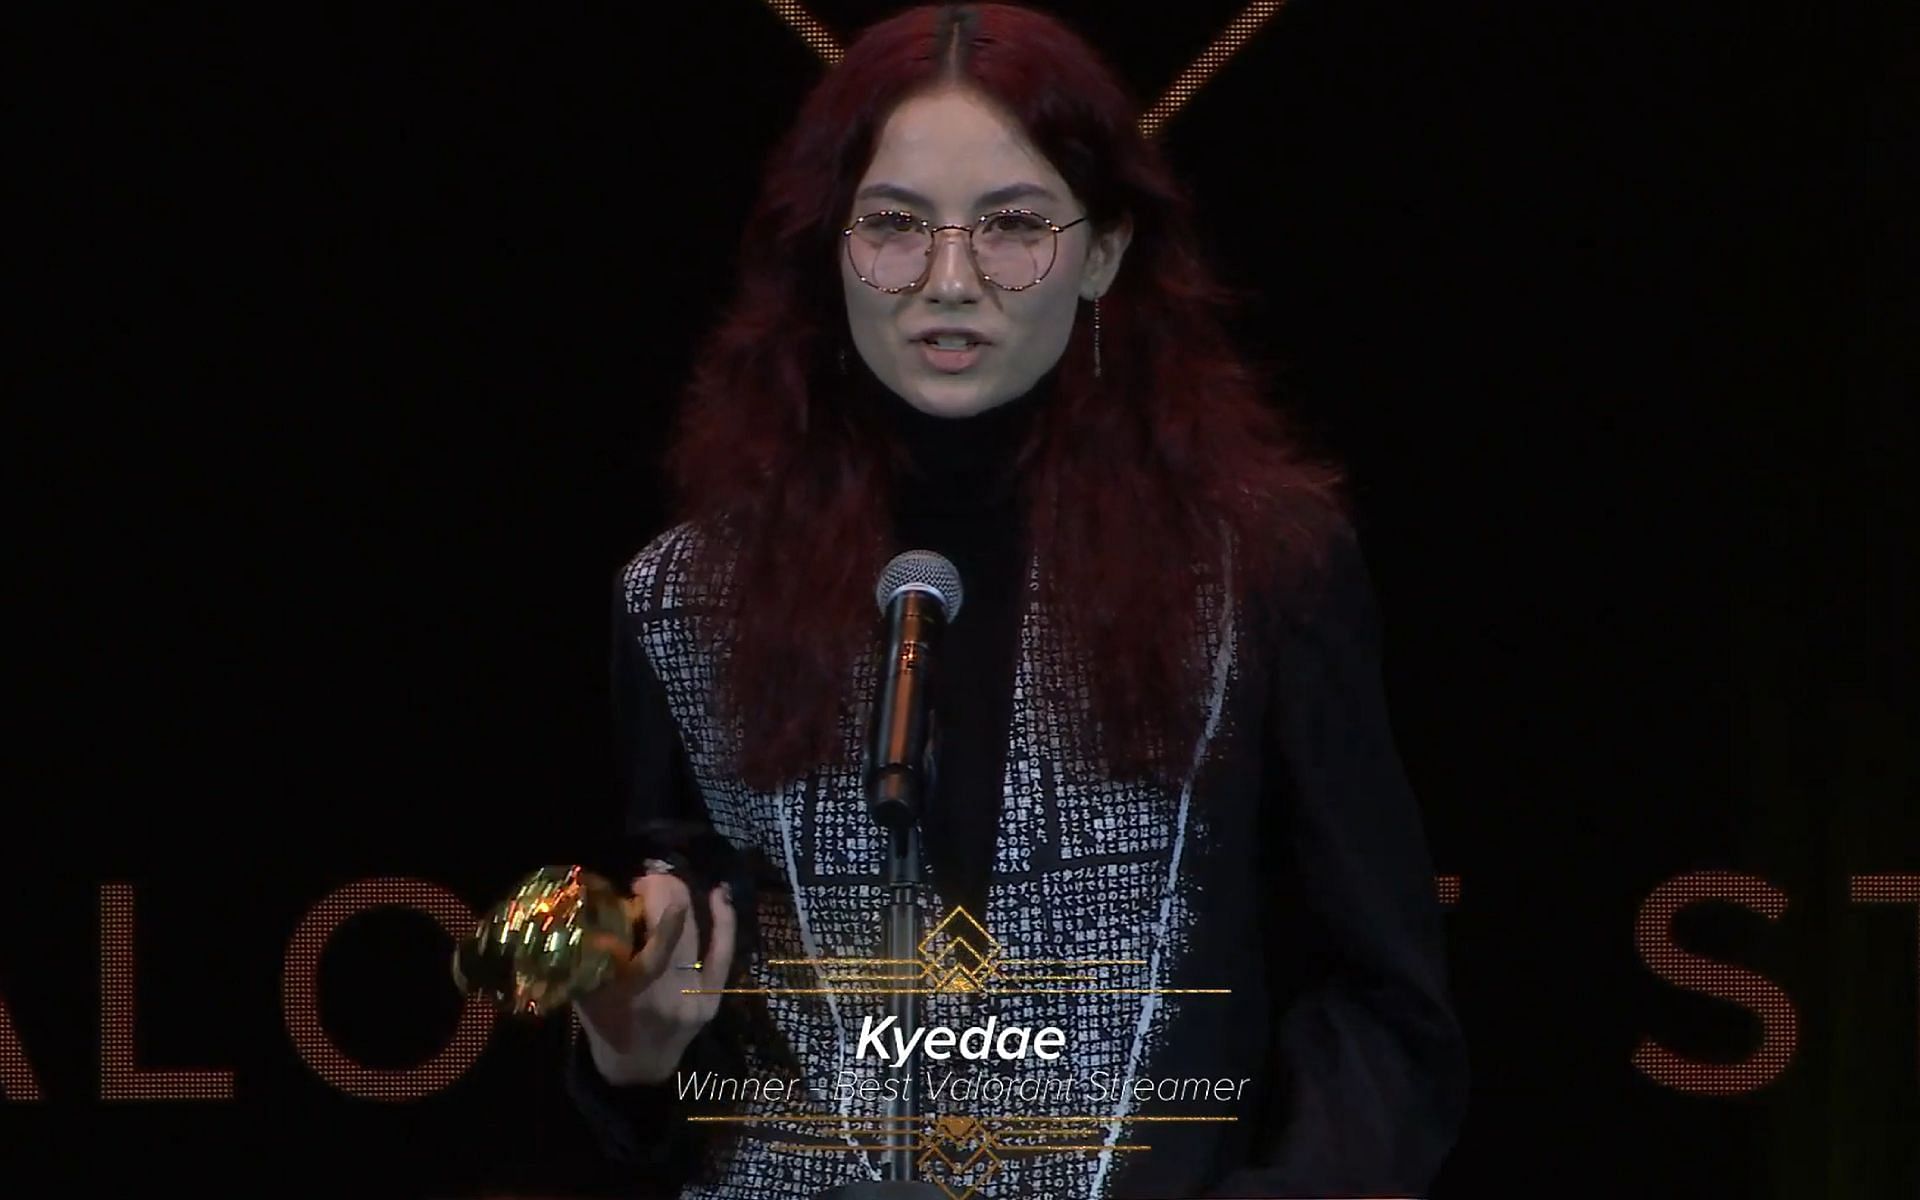 Taking a look into what the streaming community had to say about Kyedae winning the Valorant Streamer of the Year (Image via QTCinderella/Twitch)